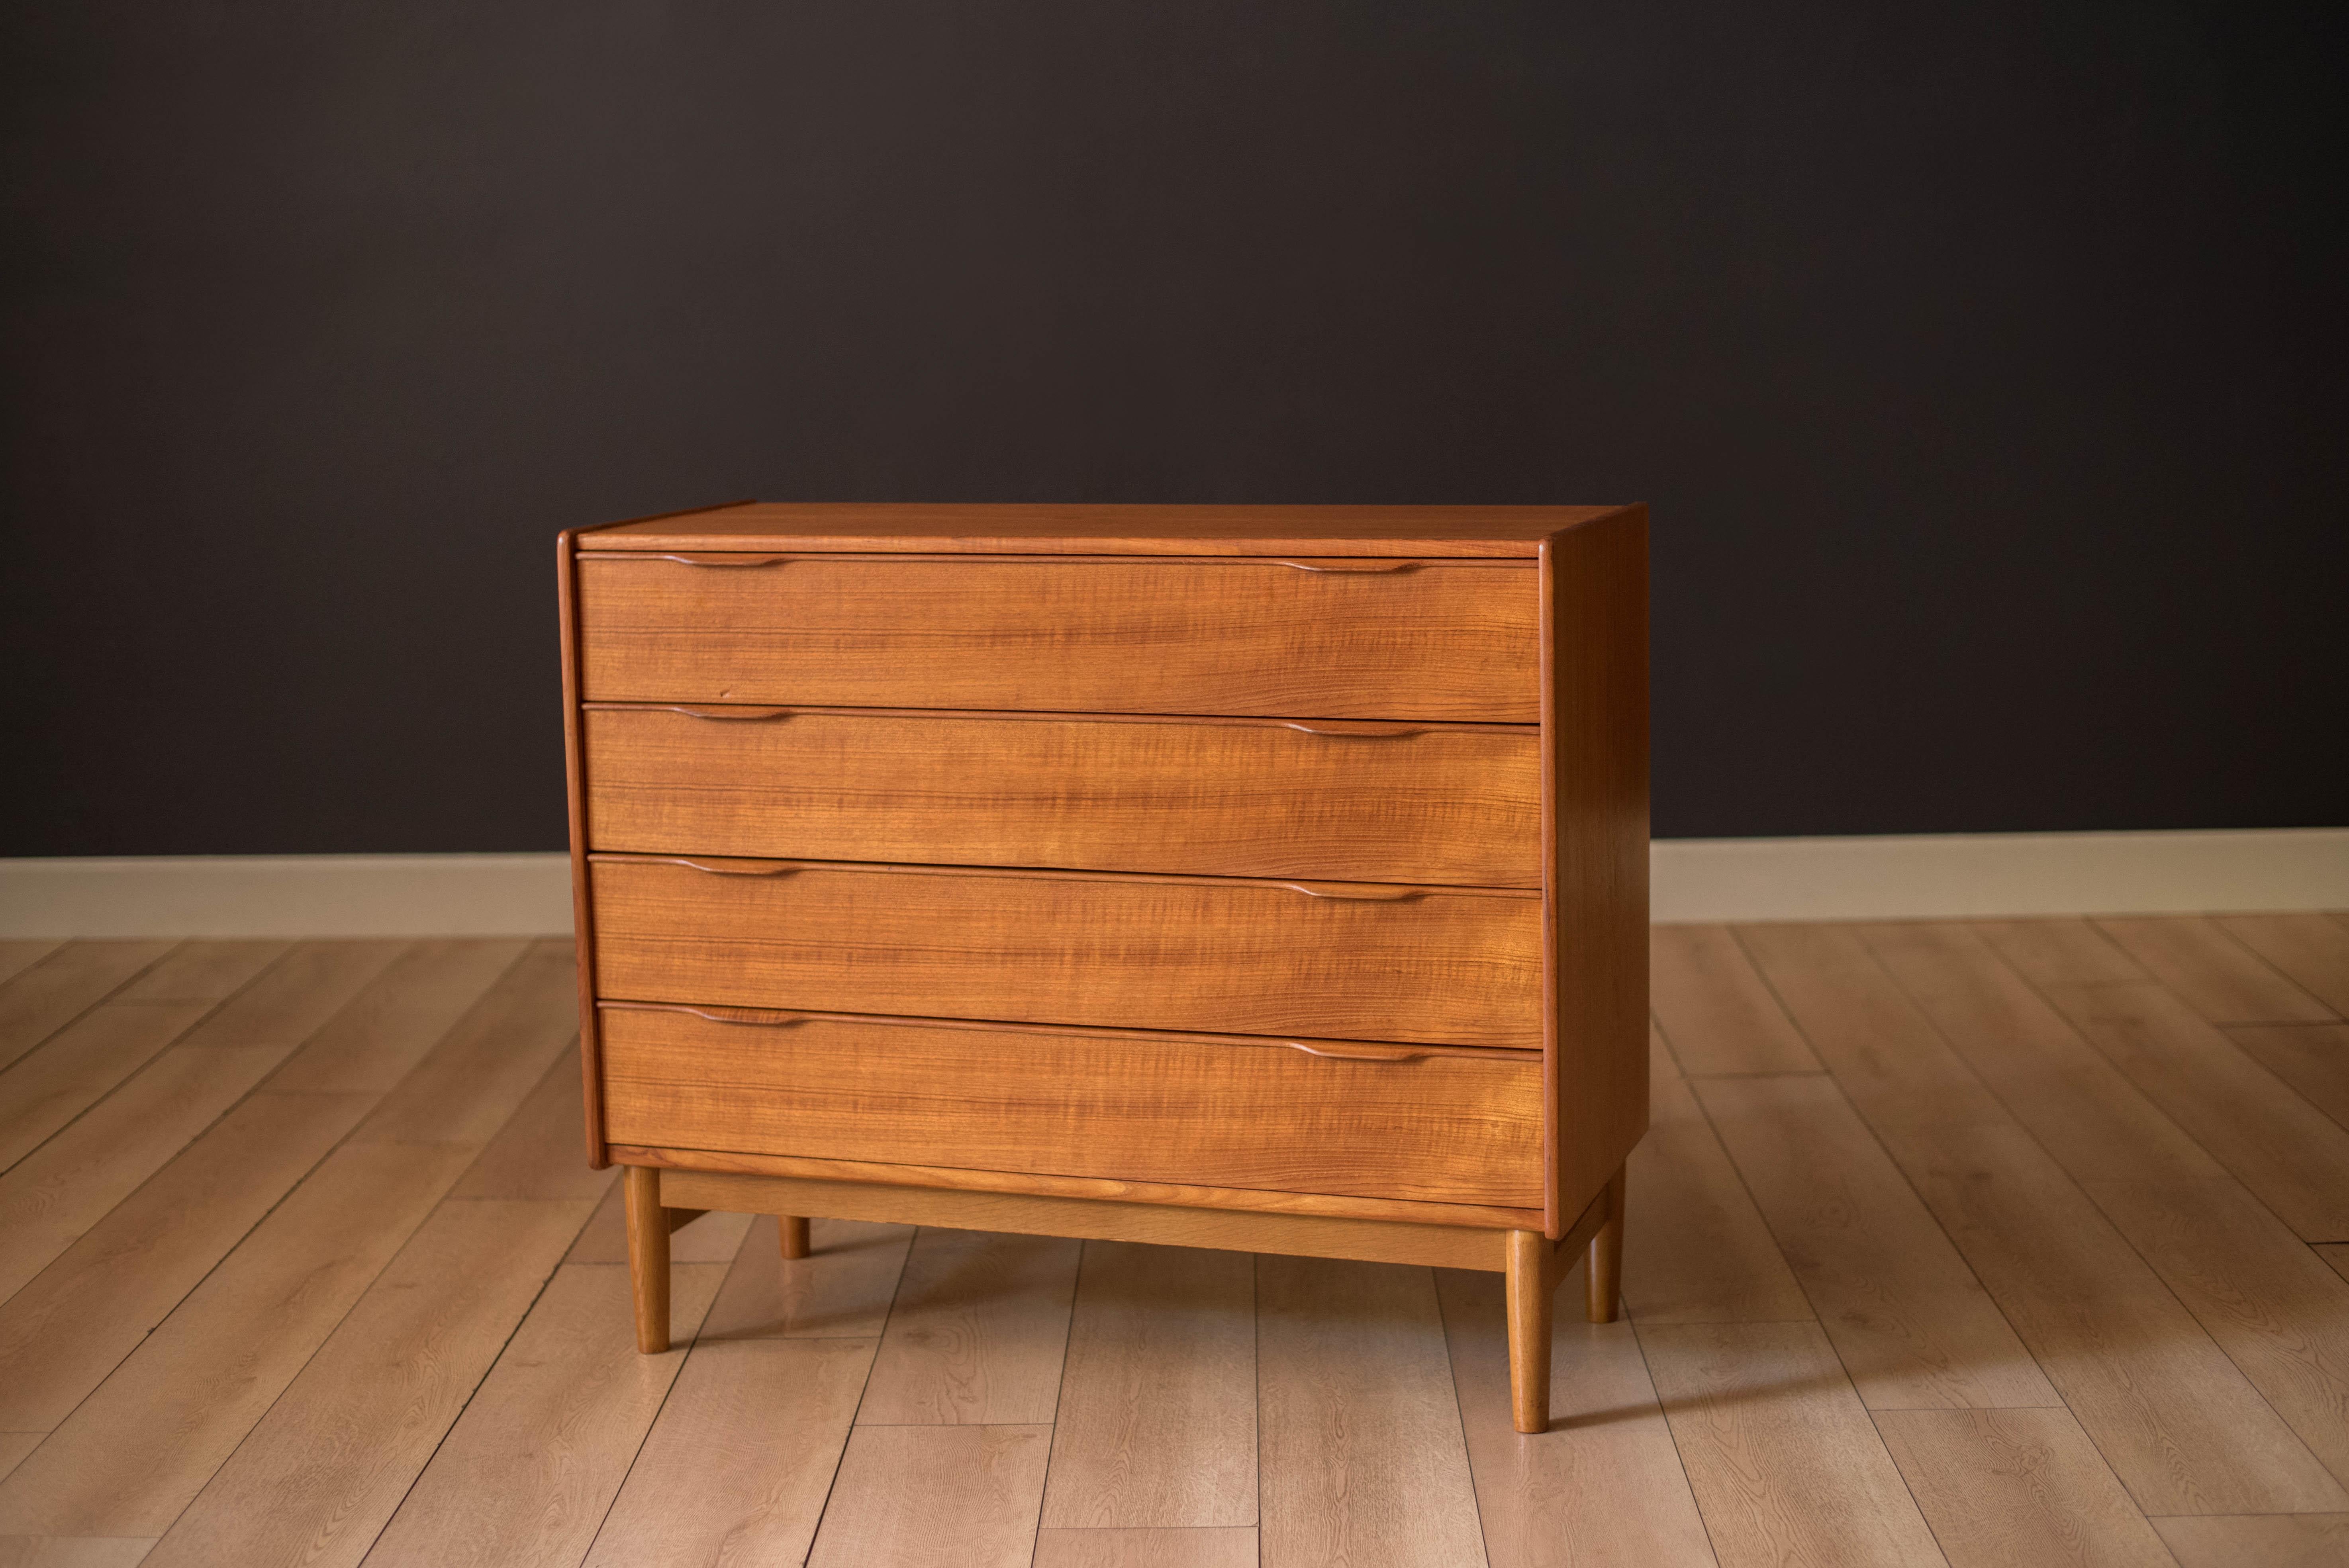 Vintage Danish chest of drawers in teak designed by Henning Jørgensen for Fredericia Møbelfabrik, Denmark circa 1960s. This unique low profile chest of drawers is perfect to use as an entryway piece or bedroom dresser. Includes four dovetail storage